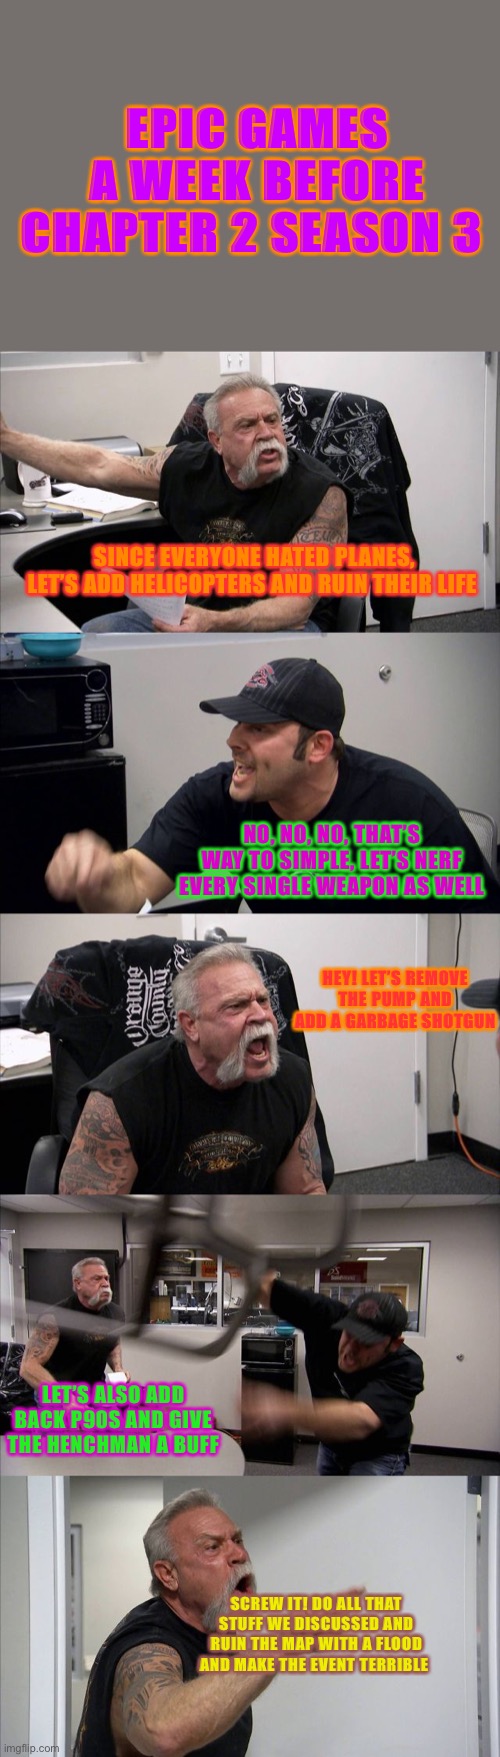 American Chopper Argument Meme | EPIC GAMES A WEEK BEFORE CHAPTER 2 SEASON 3; SINCE EVERYONE HATED PLANES, LET’S ADD HELICOPTERS AND RUIN THEIR LIFE; NO, NO, NO, THAT’S WAY TO SIMPLE, LET’S NERF EVERY SINGLE WEAPON AS WELL; HEY! LET’S REMOVE THE PUMP AND ADD A GARBAGE SHOTGUN; LET’S ALSO ADD BACK P90S AND GIVE THE HENCHMAN A BUFF; SCREW IT! DO ALL THAT STUFF WE DISCUSSED AND RUIN THE MAP WITH A FLOOD AND MAKE THE EVENT TERRIBLE | image tagged in memes,american chopper argument | made w/ Imgflip meme maker